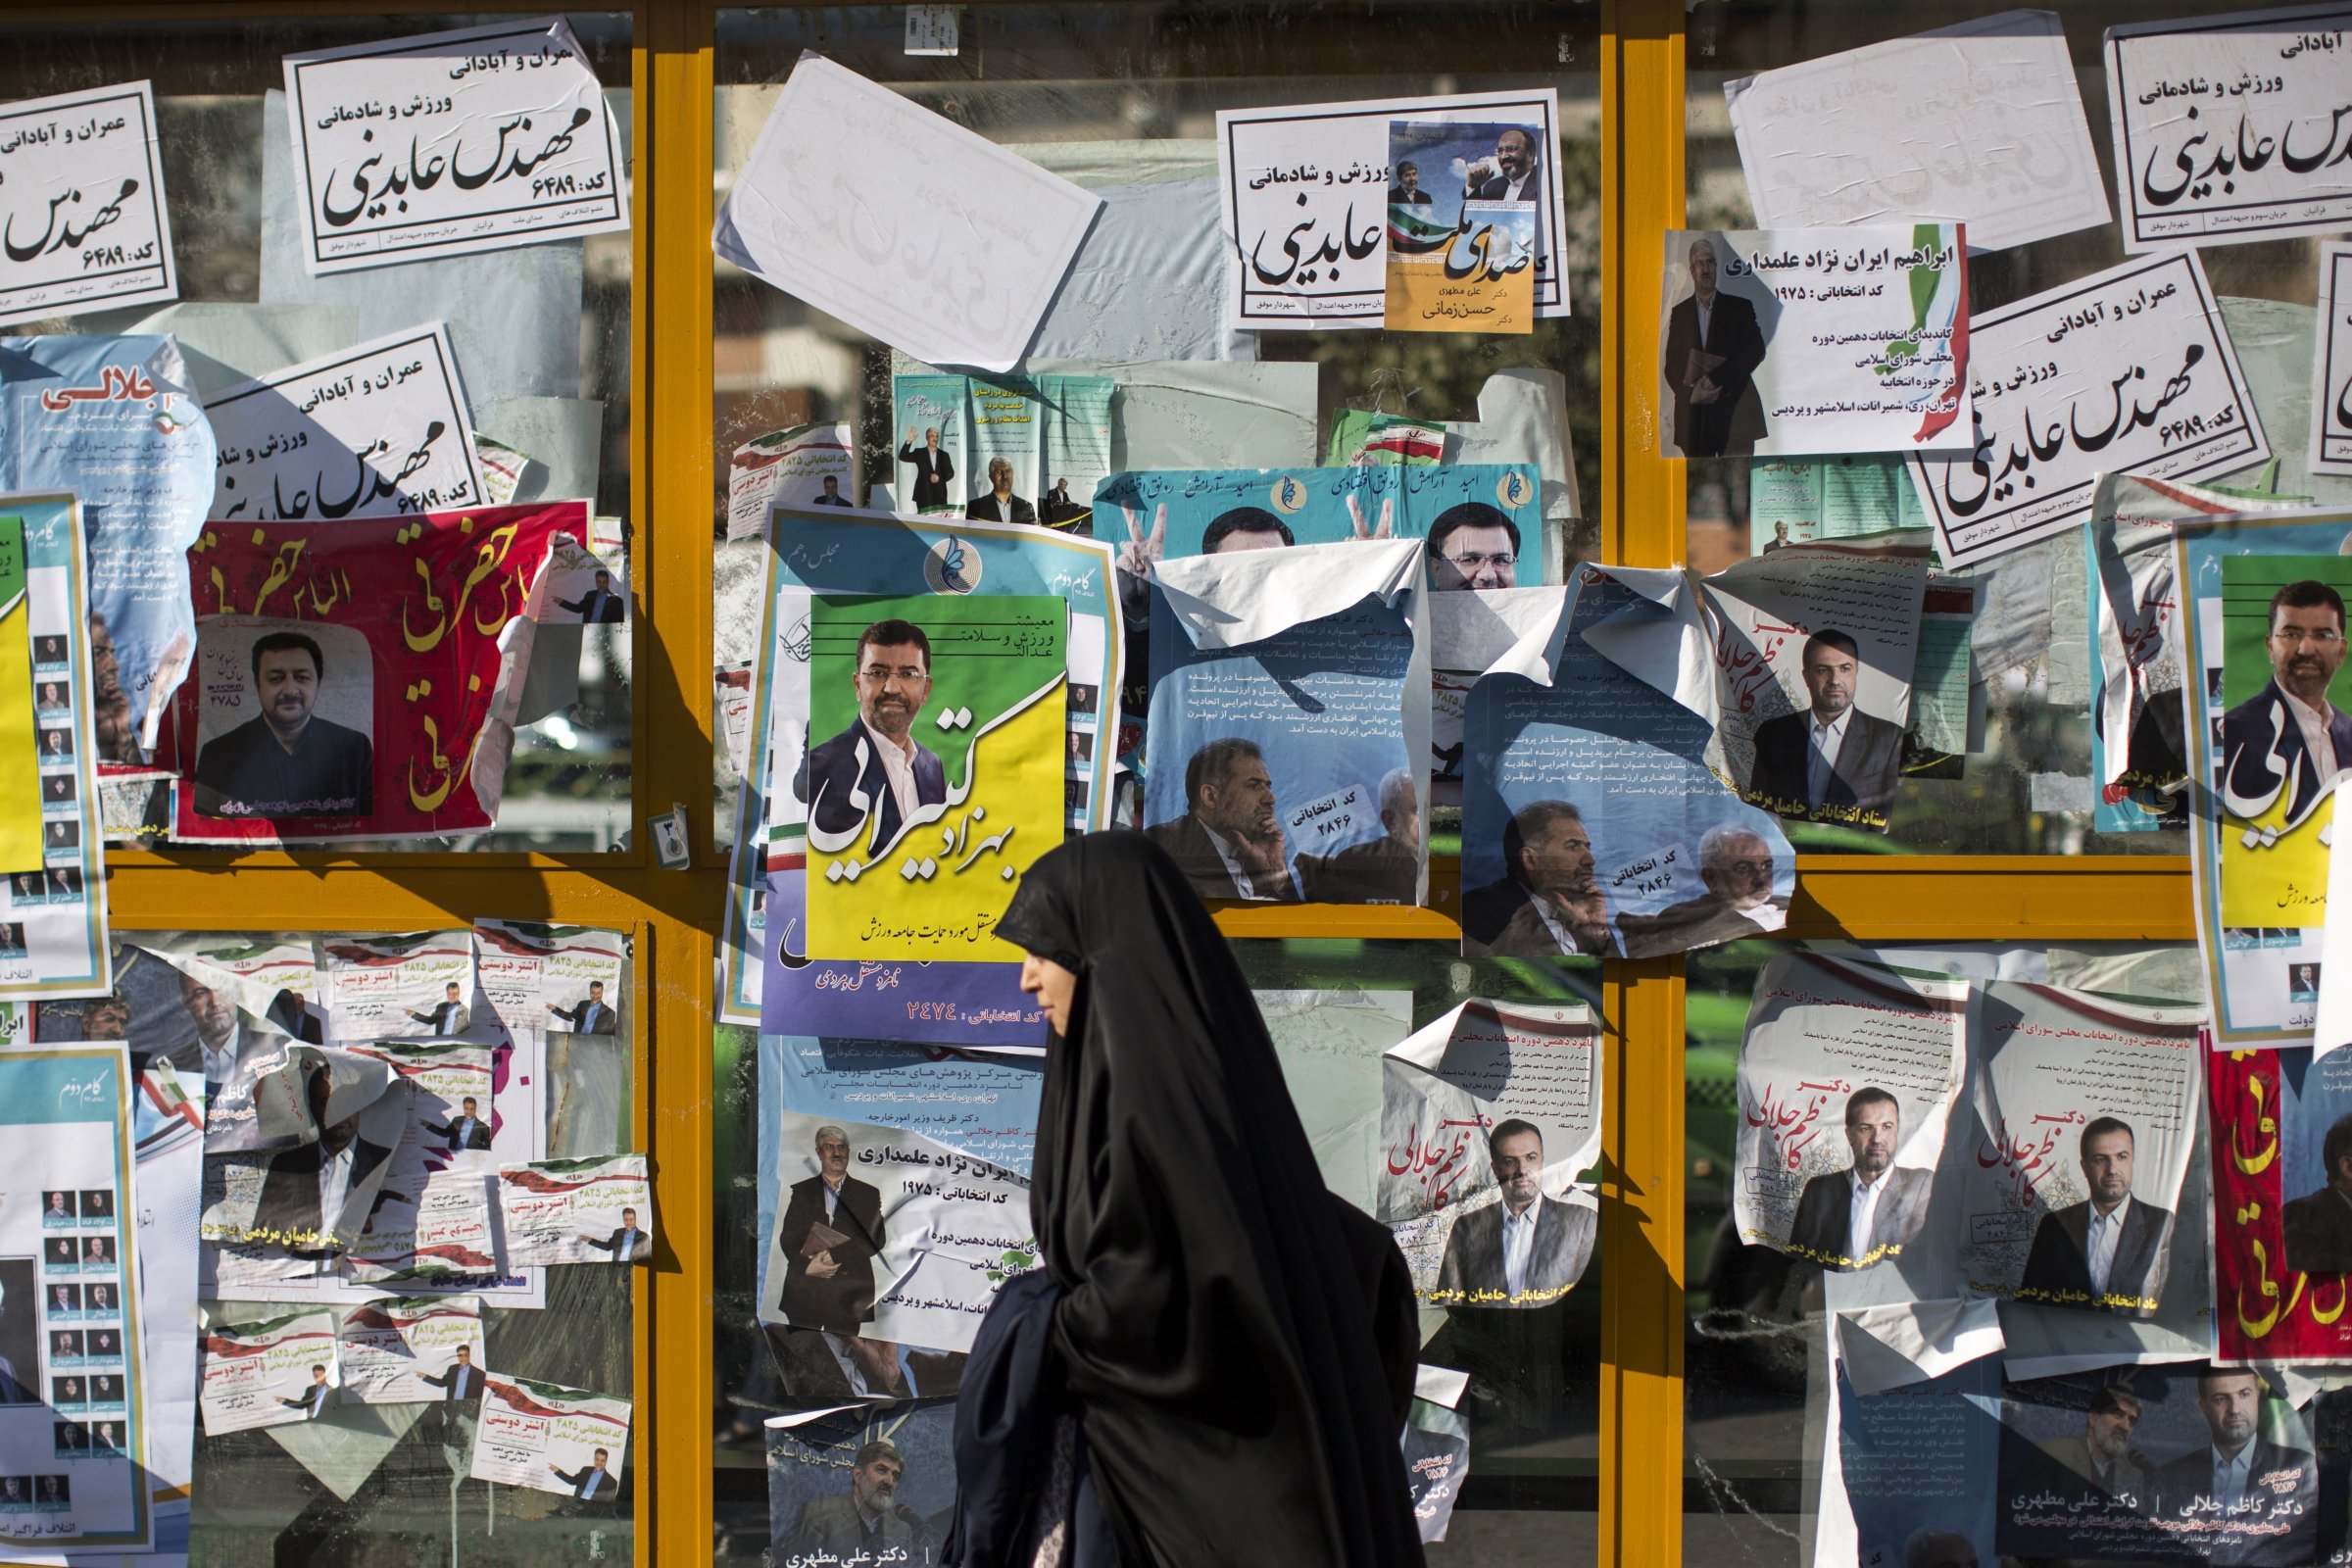 An Iranian woman walks past electoral posters for upcoming parliamentary elections in downtown Tehran on Feb. 25, 2016.